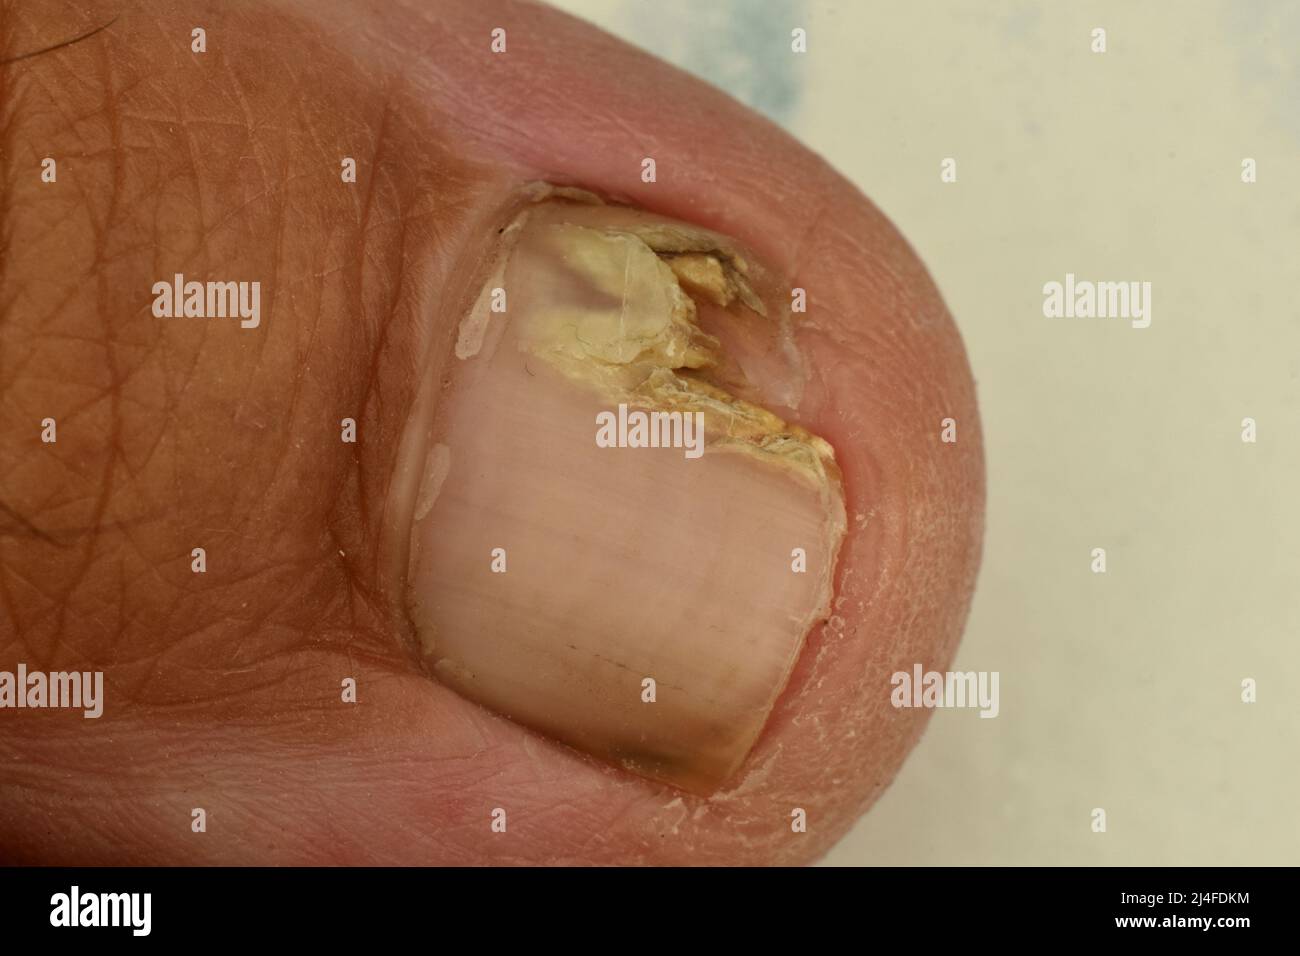 Nail abnormalities may relate to other medical conditions. Broken nail. Stock Photo